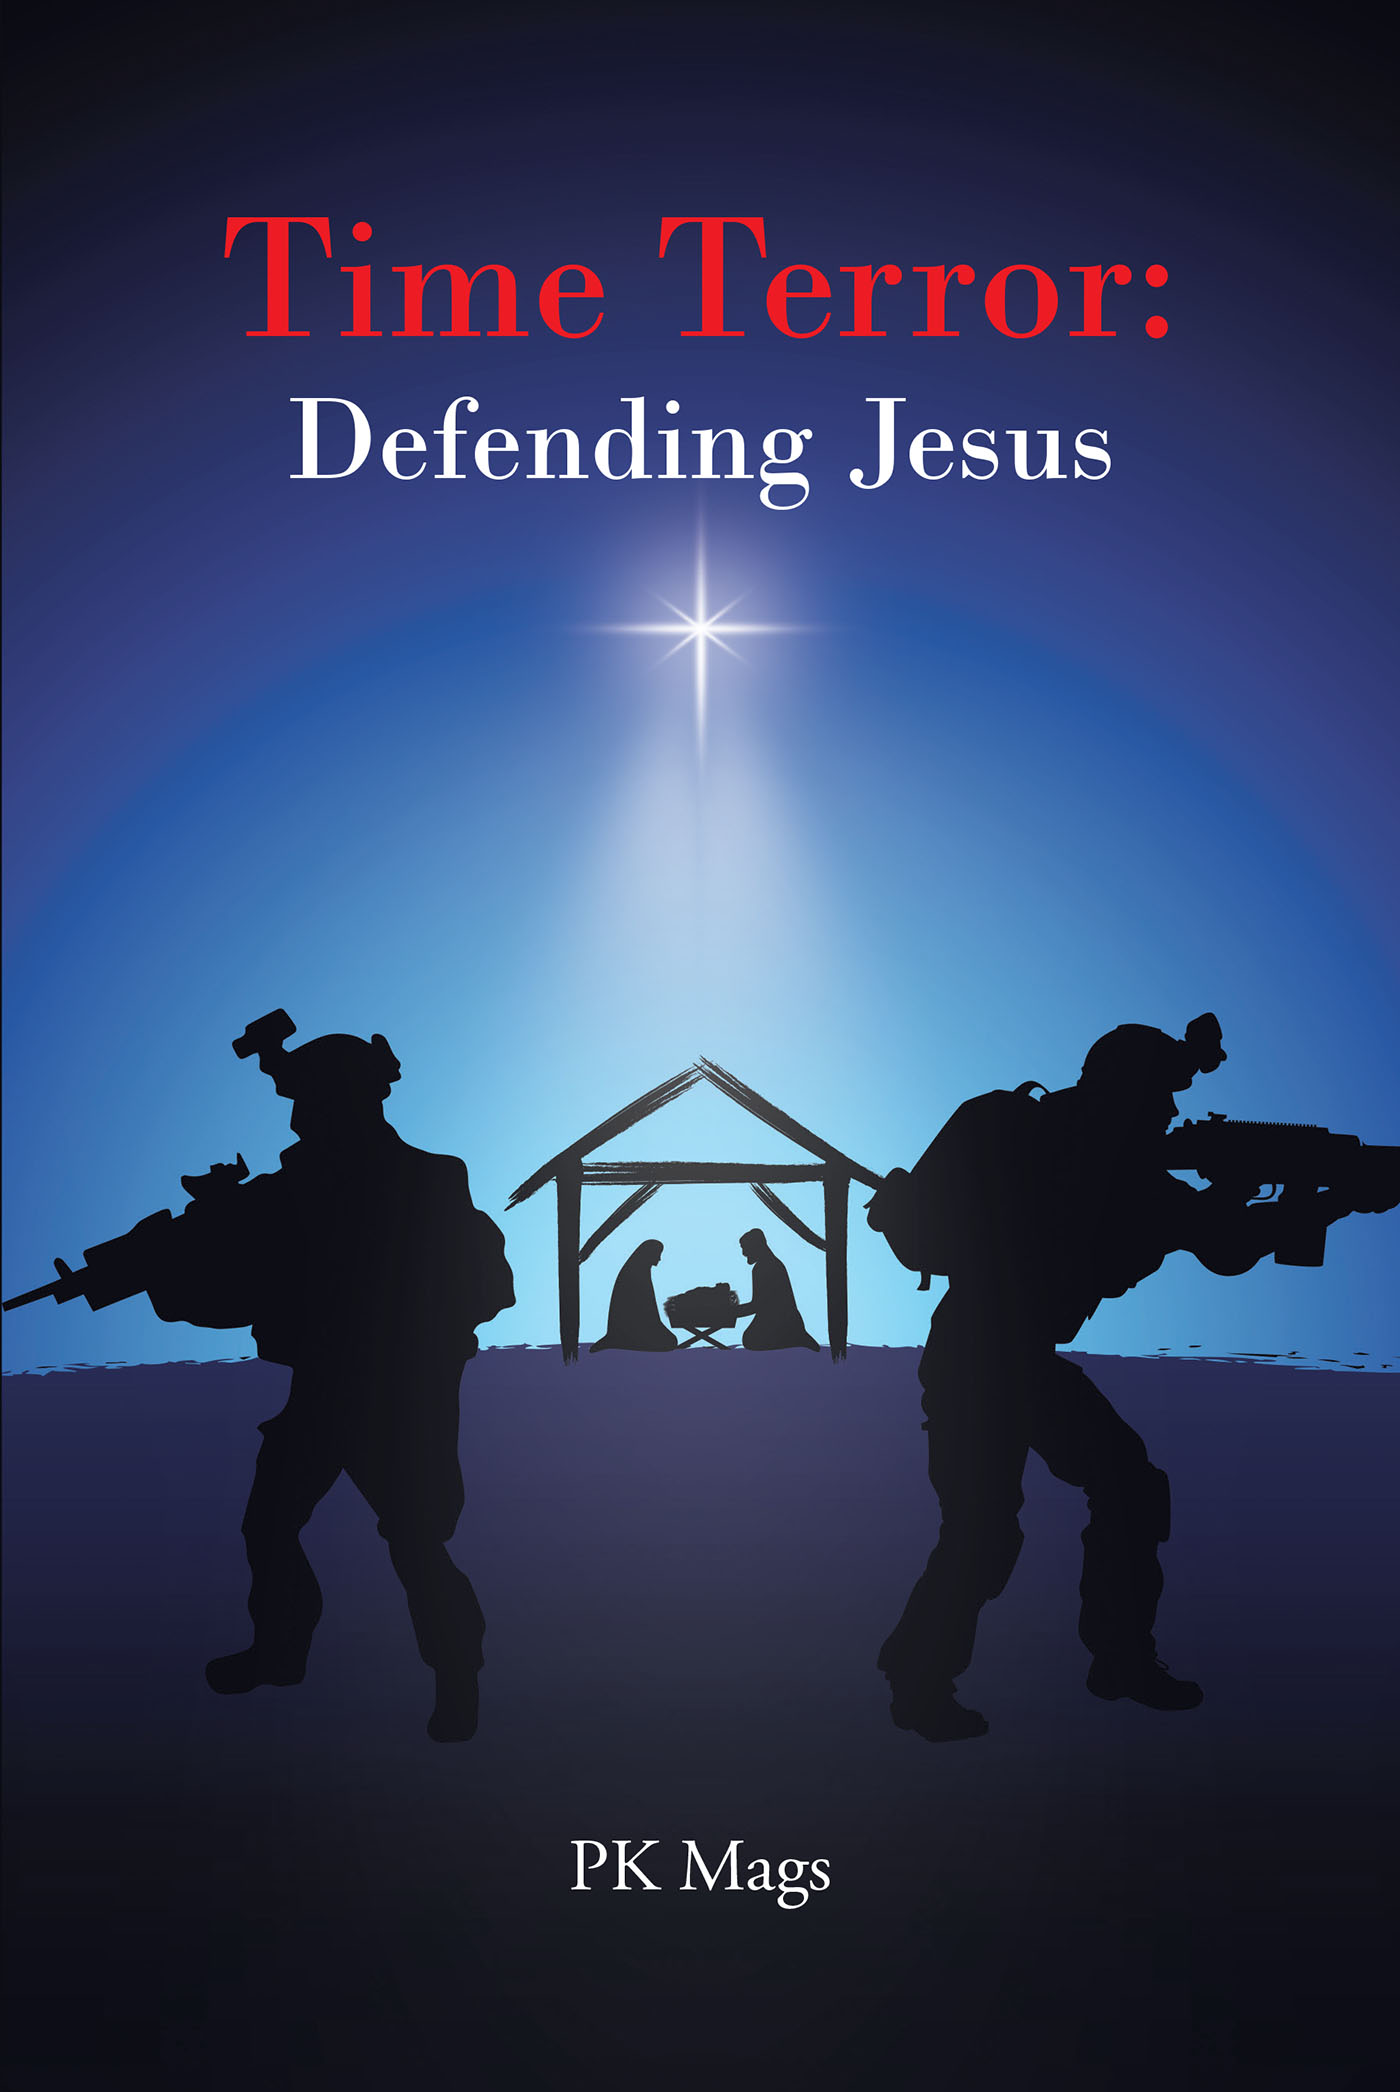 Author PK Mags’s New Book, “Time Terror: Defending Jesus,” Follows a CIA Agent Who Journeys to the Past to Protect Jesus and Christianity from a Time Traveling Assassin